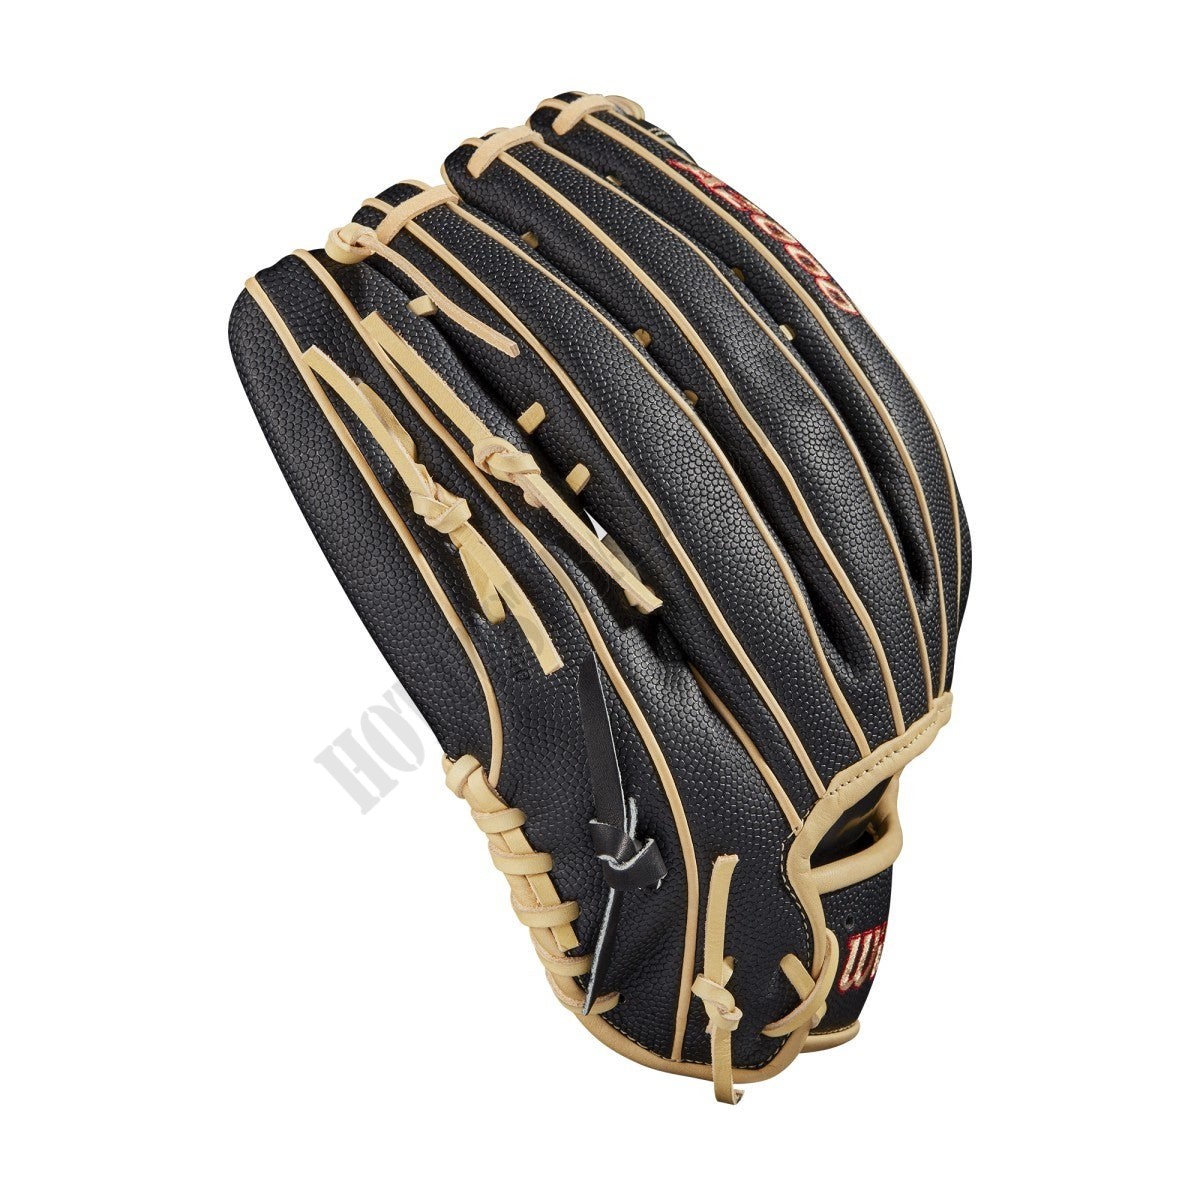 2021 A2000 1800SS 12.75" Outfield Baseball Glove ● Wilson Promotions - -4